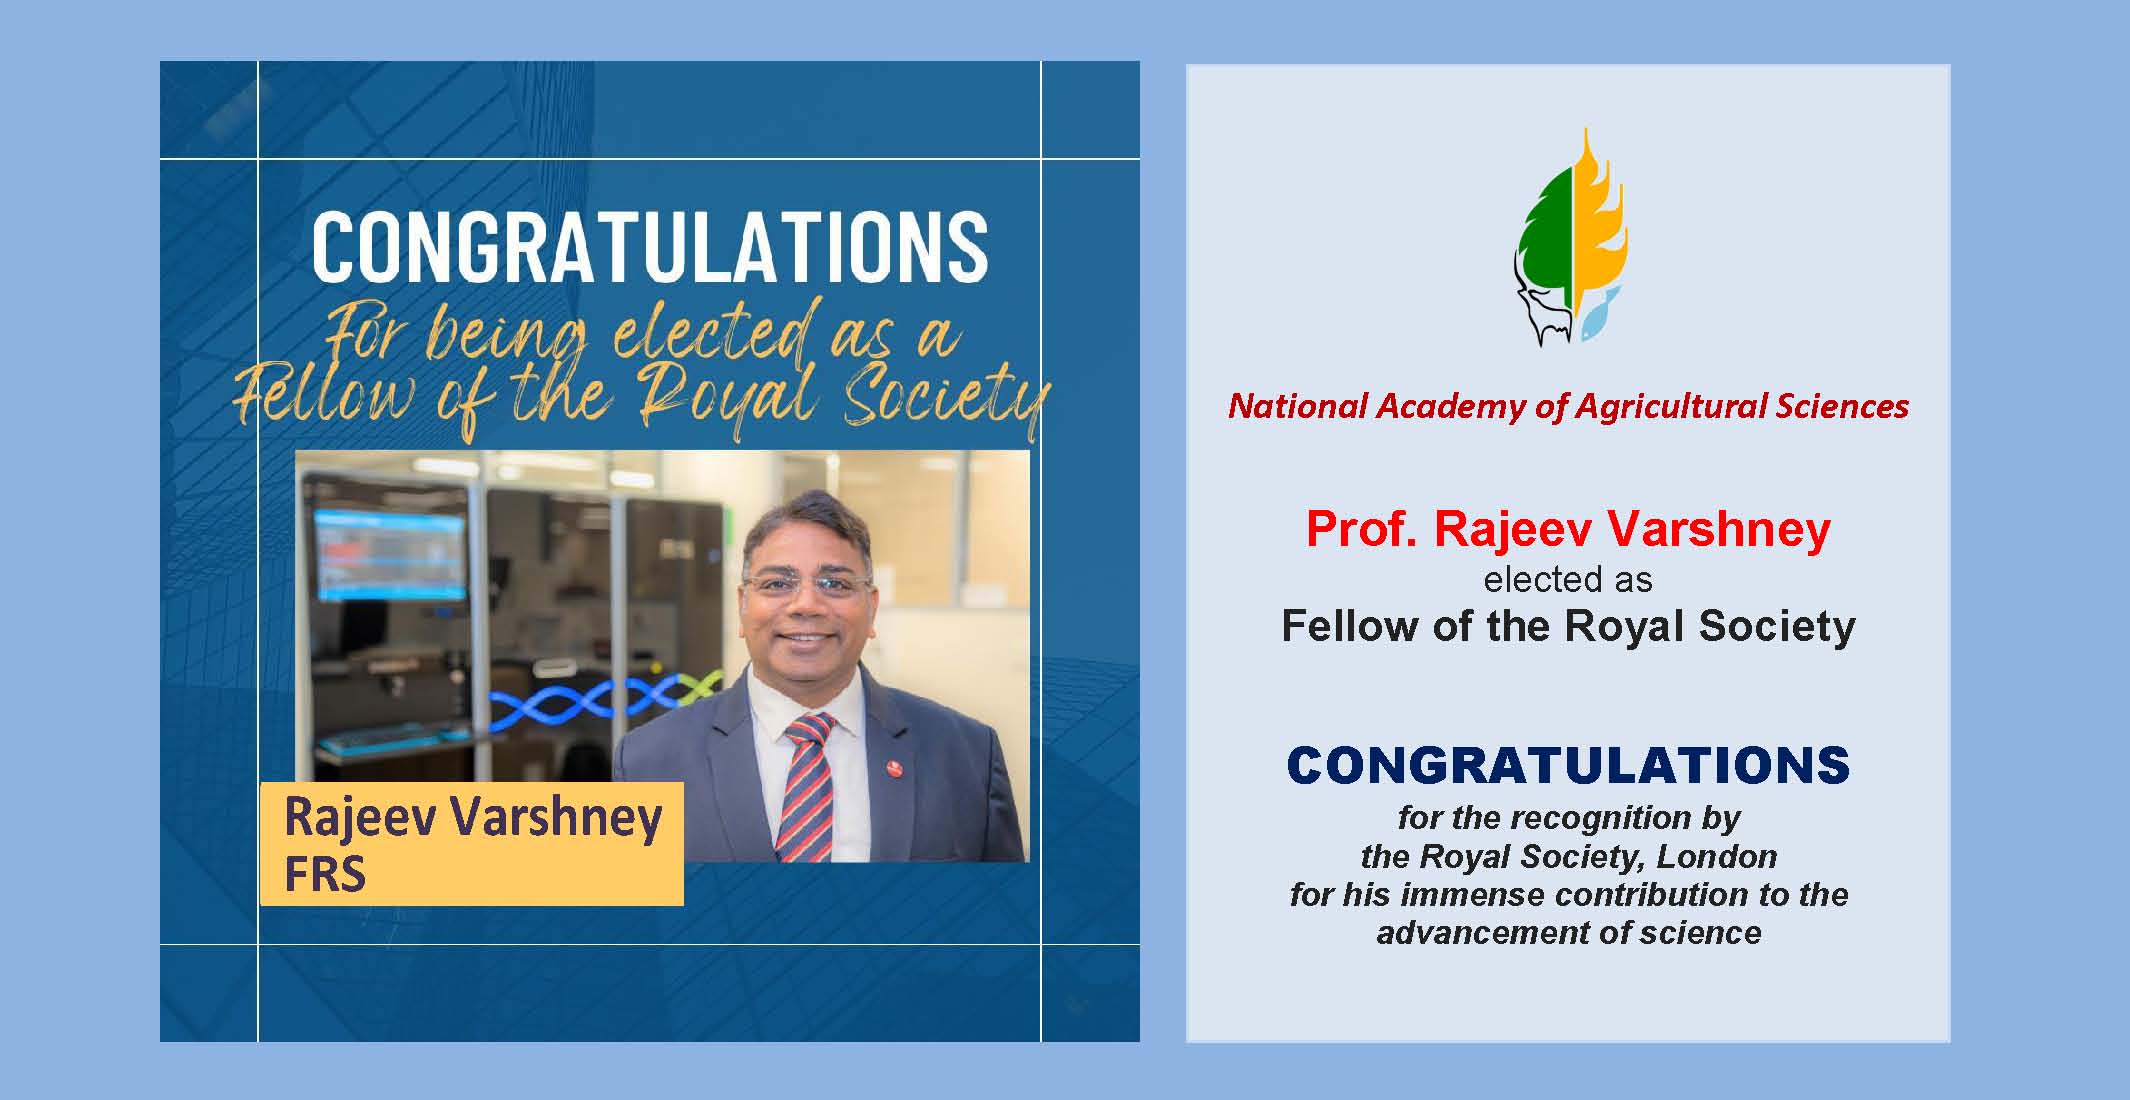 Prof. Rajeev Varshney, Foreign Secretary, NAAS elected as Fellow of the Royal Society, London